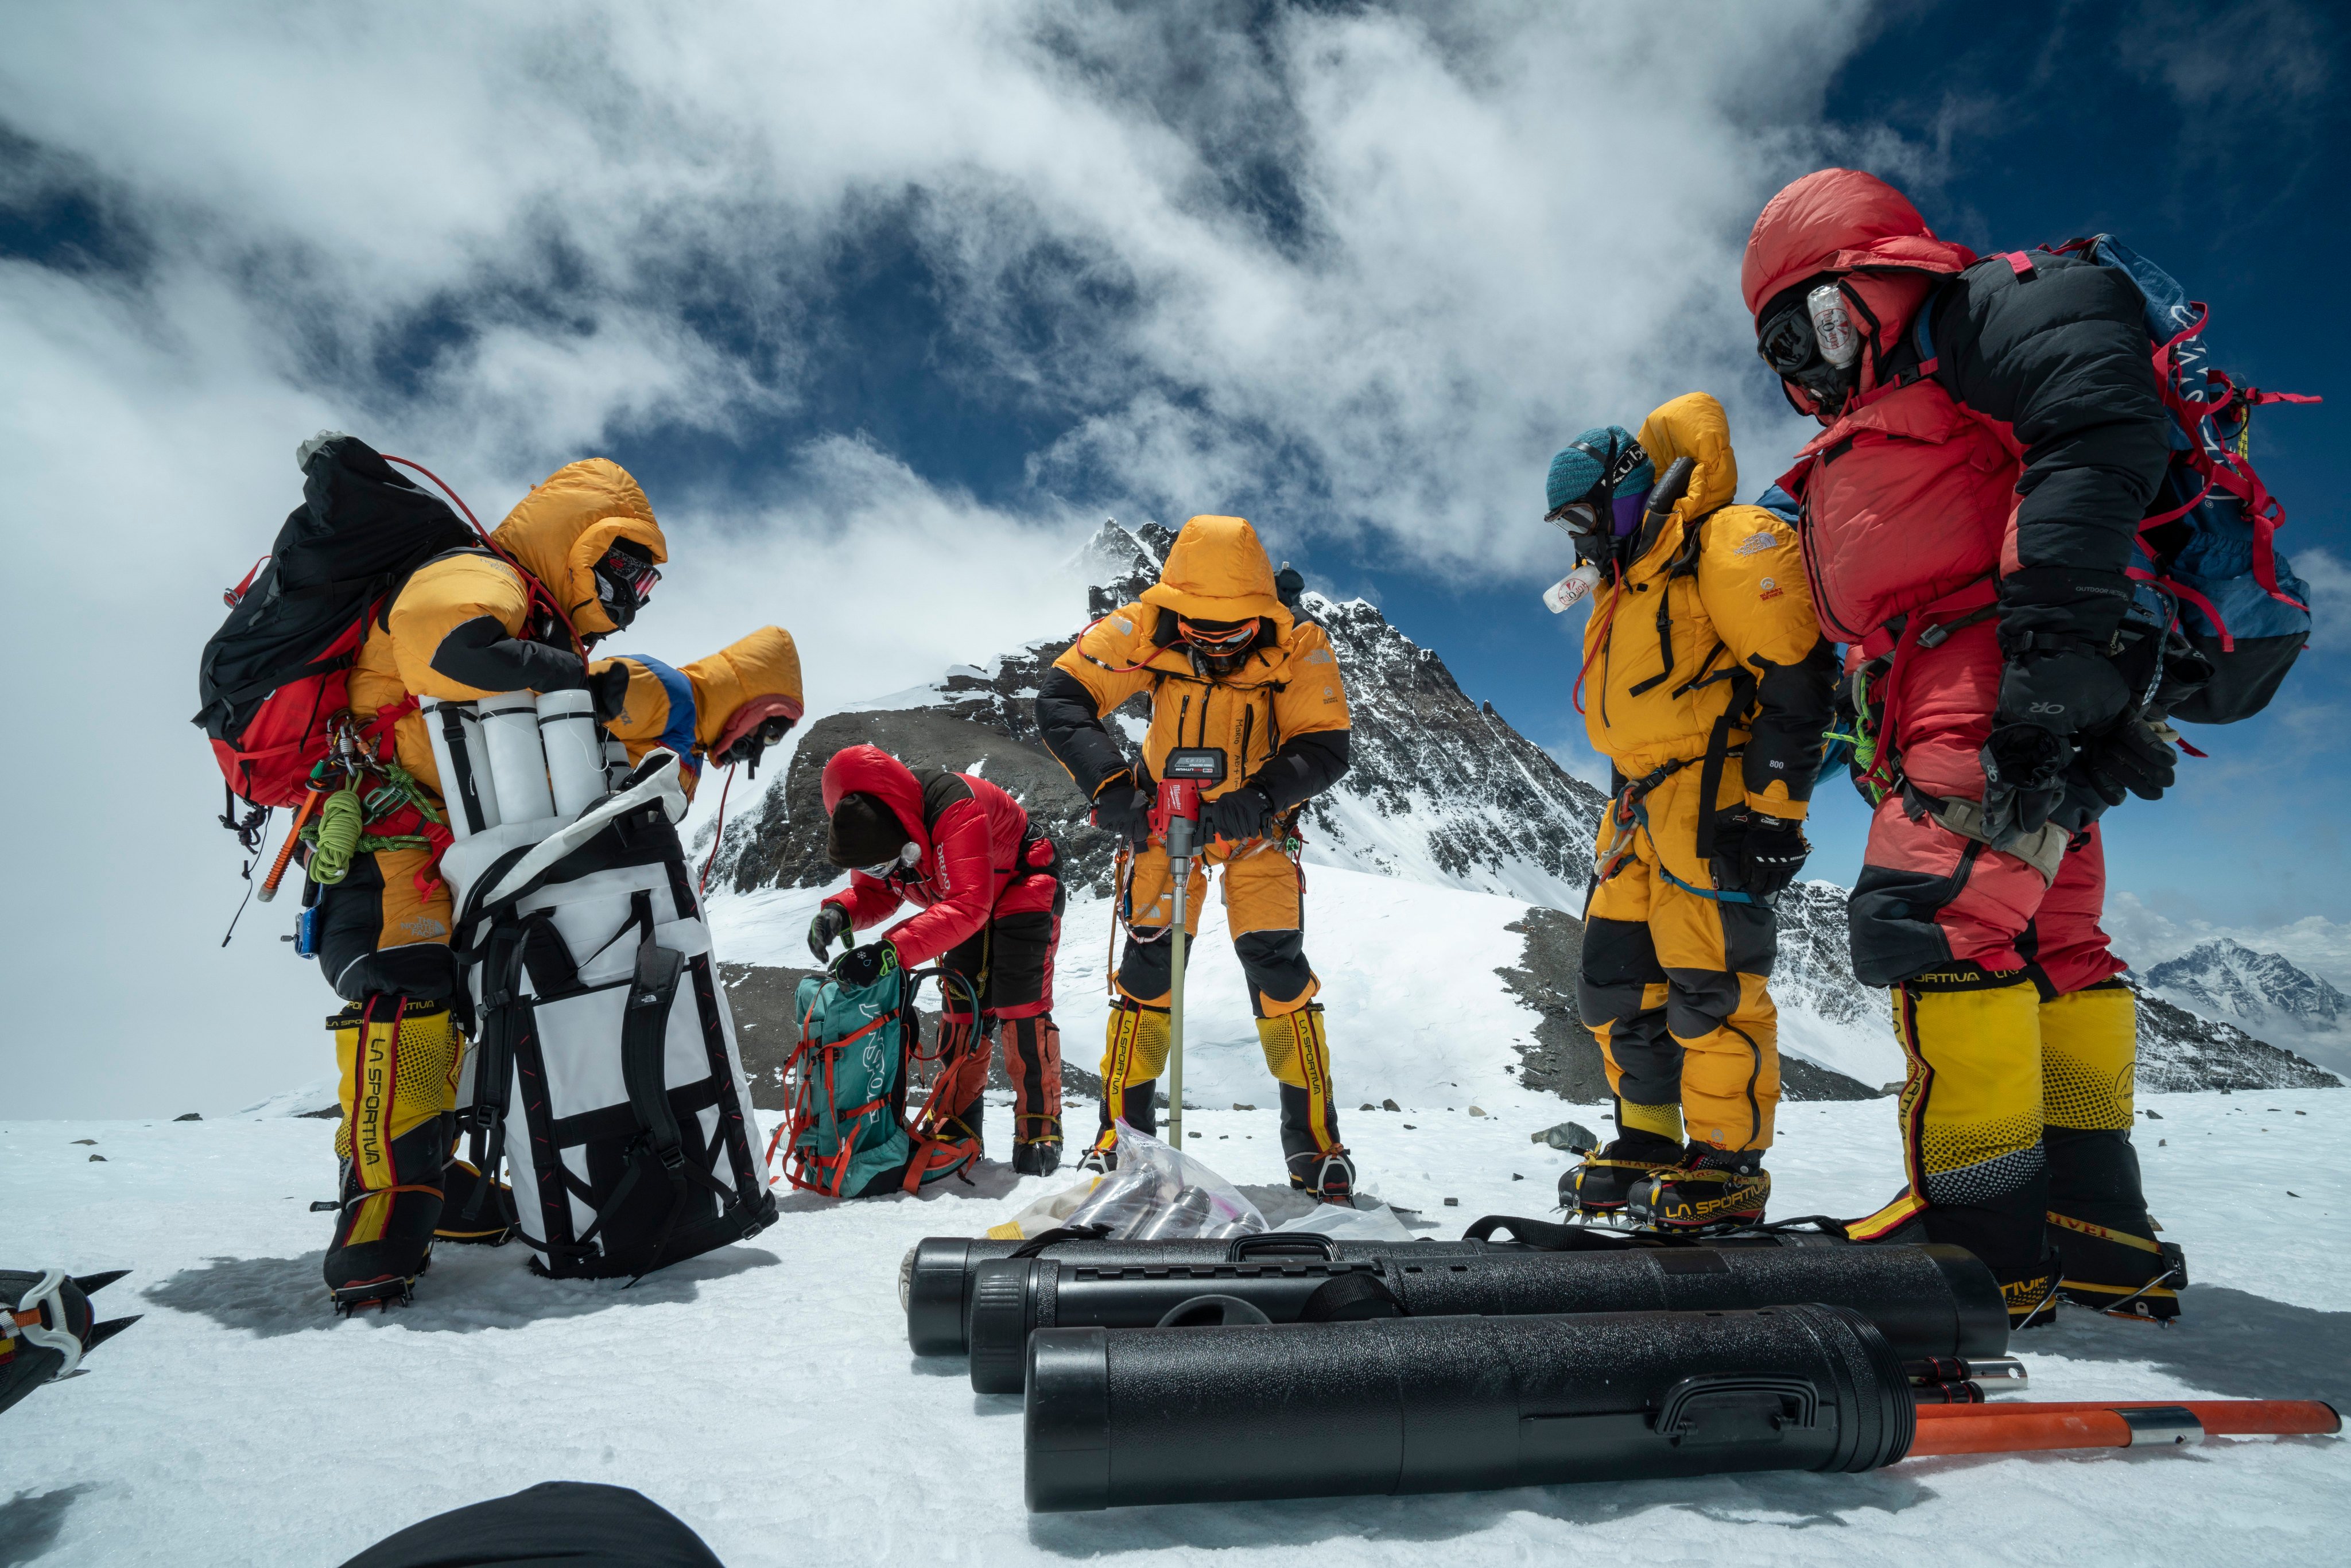 National Geographic Society in partnership with Tribhuvan University, leads an international team of scientists and explorers up Mount Everest to conduct a scientific trip that is believed to be the most comprehensive single scientific expedition to the mountain in history. Photo: National Geographic Society